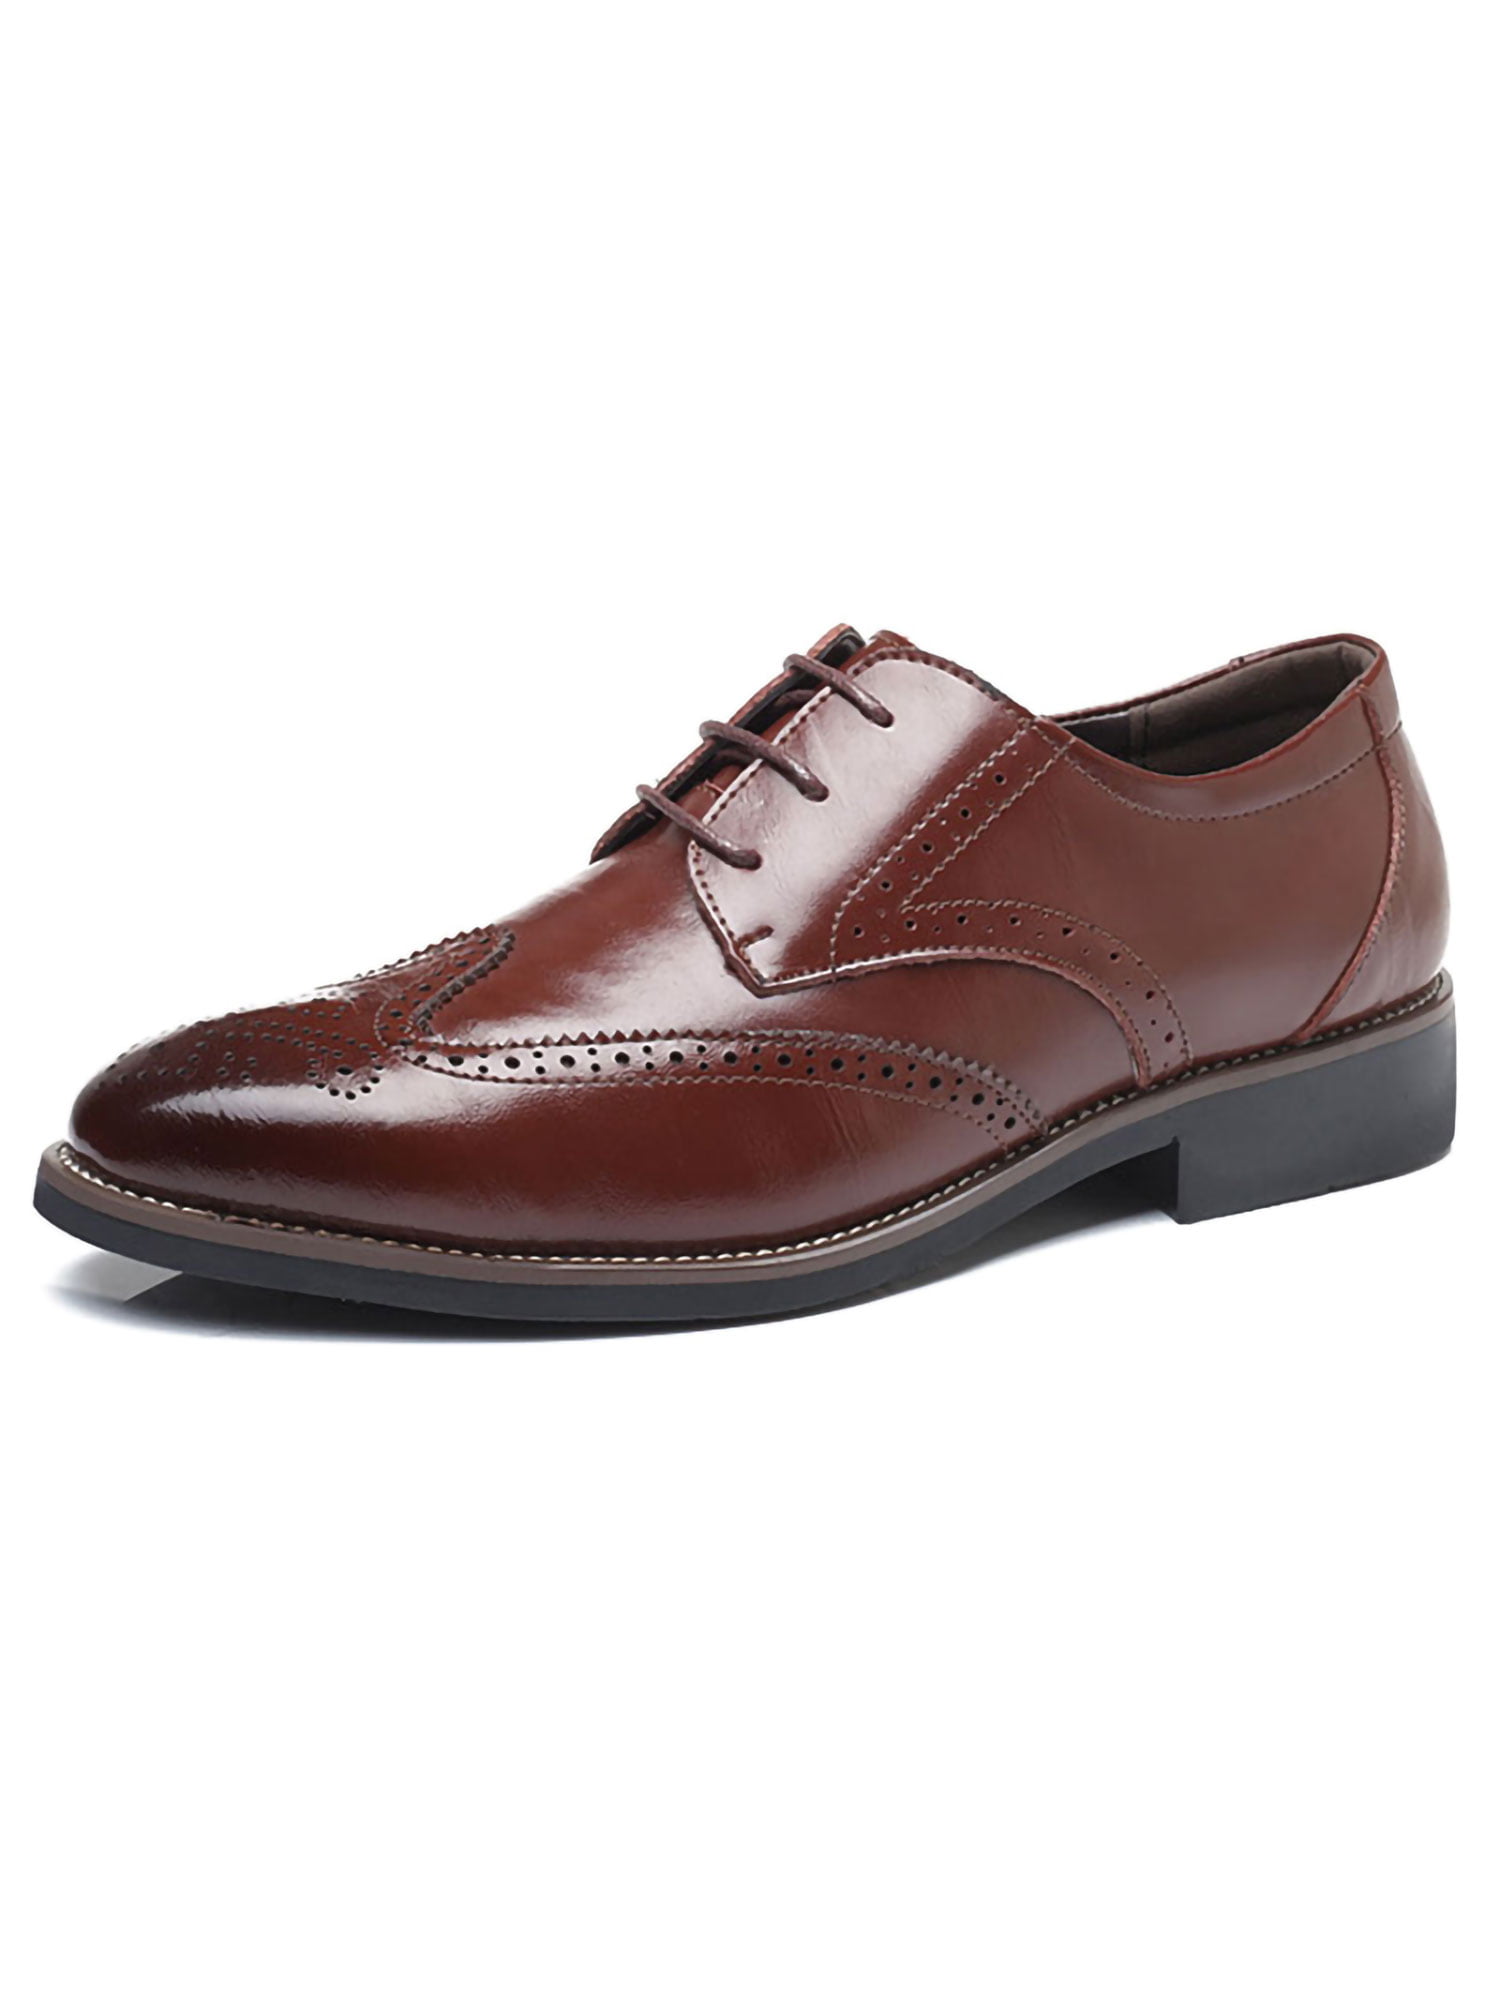 Details about   Oxfords Men's Leather Wedding Wing Tip Pointed Toe Dress Formal Brogue Shoes New